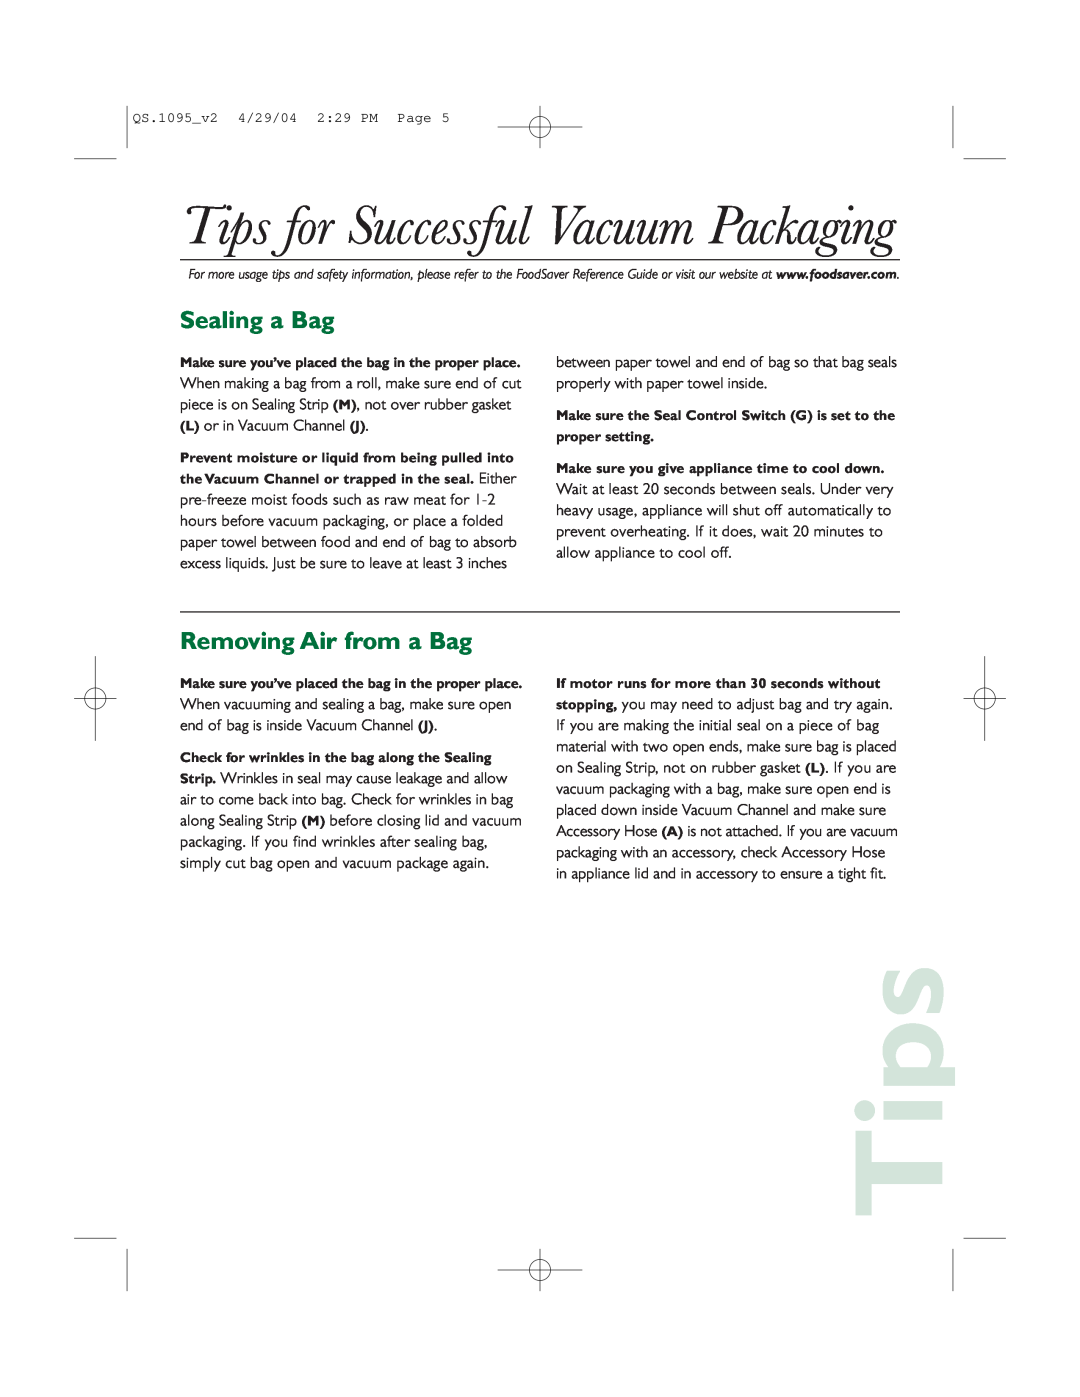 FoodSaver V1095 quick start Tips for Successful Vacuum Packaging, Sealing a Bag, Removing Air from a Bag 